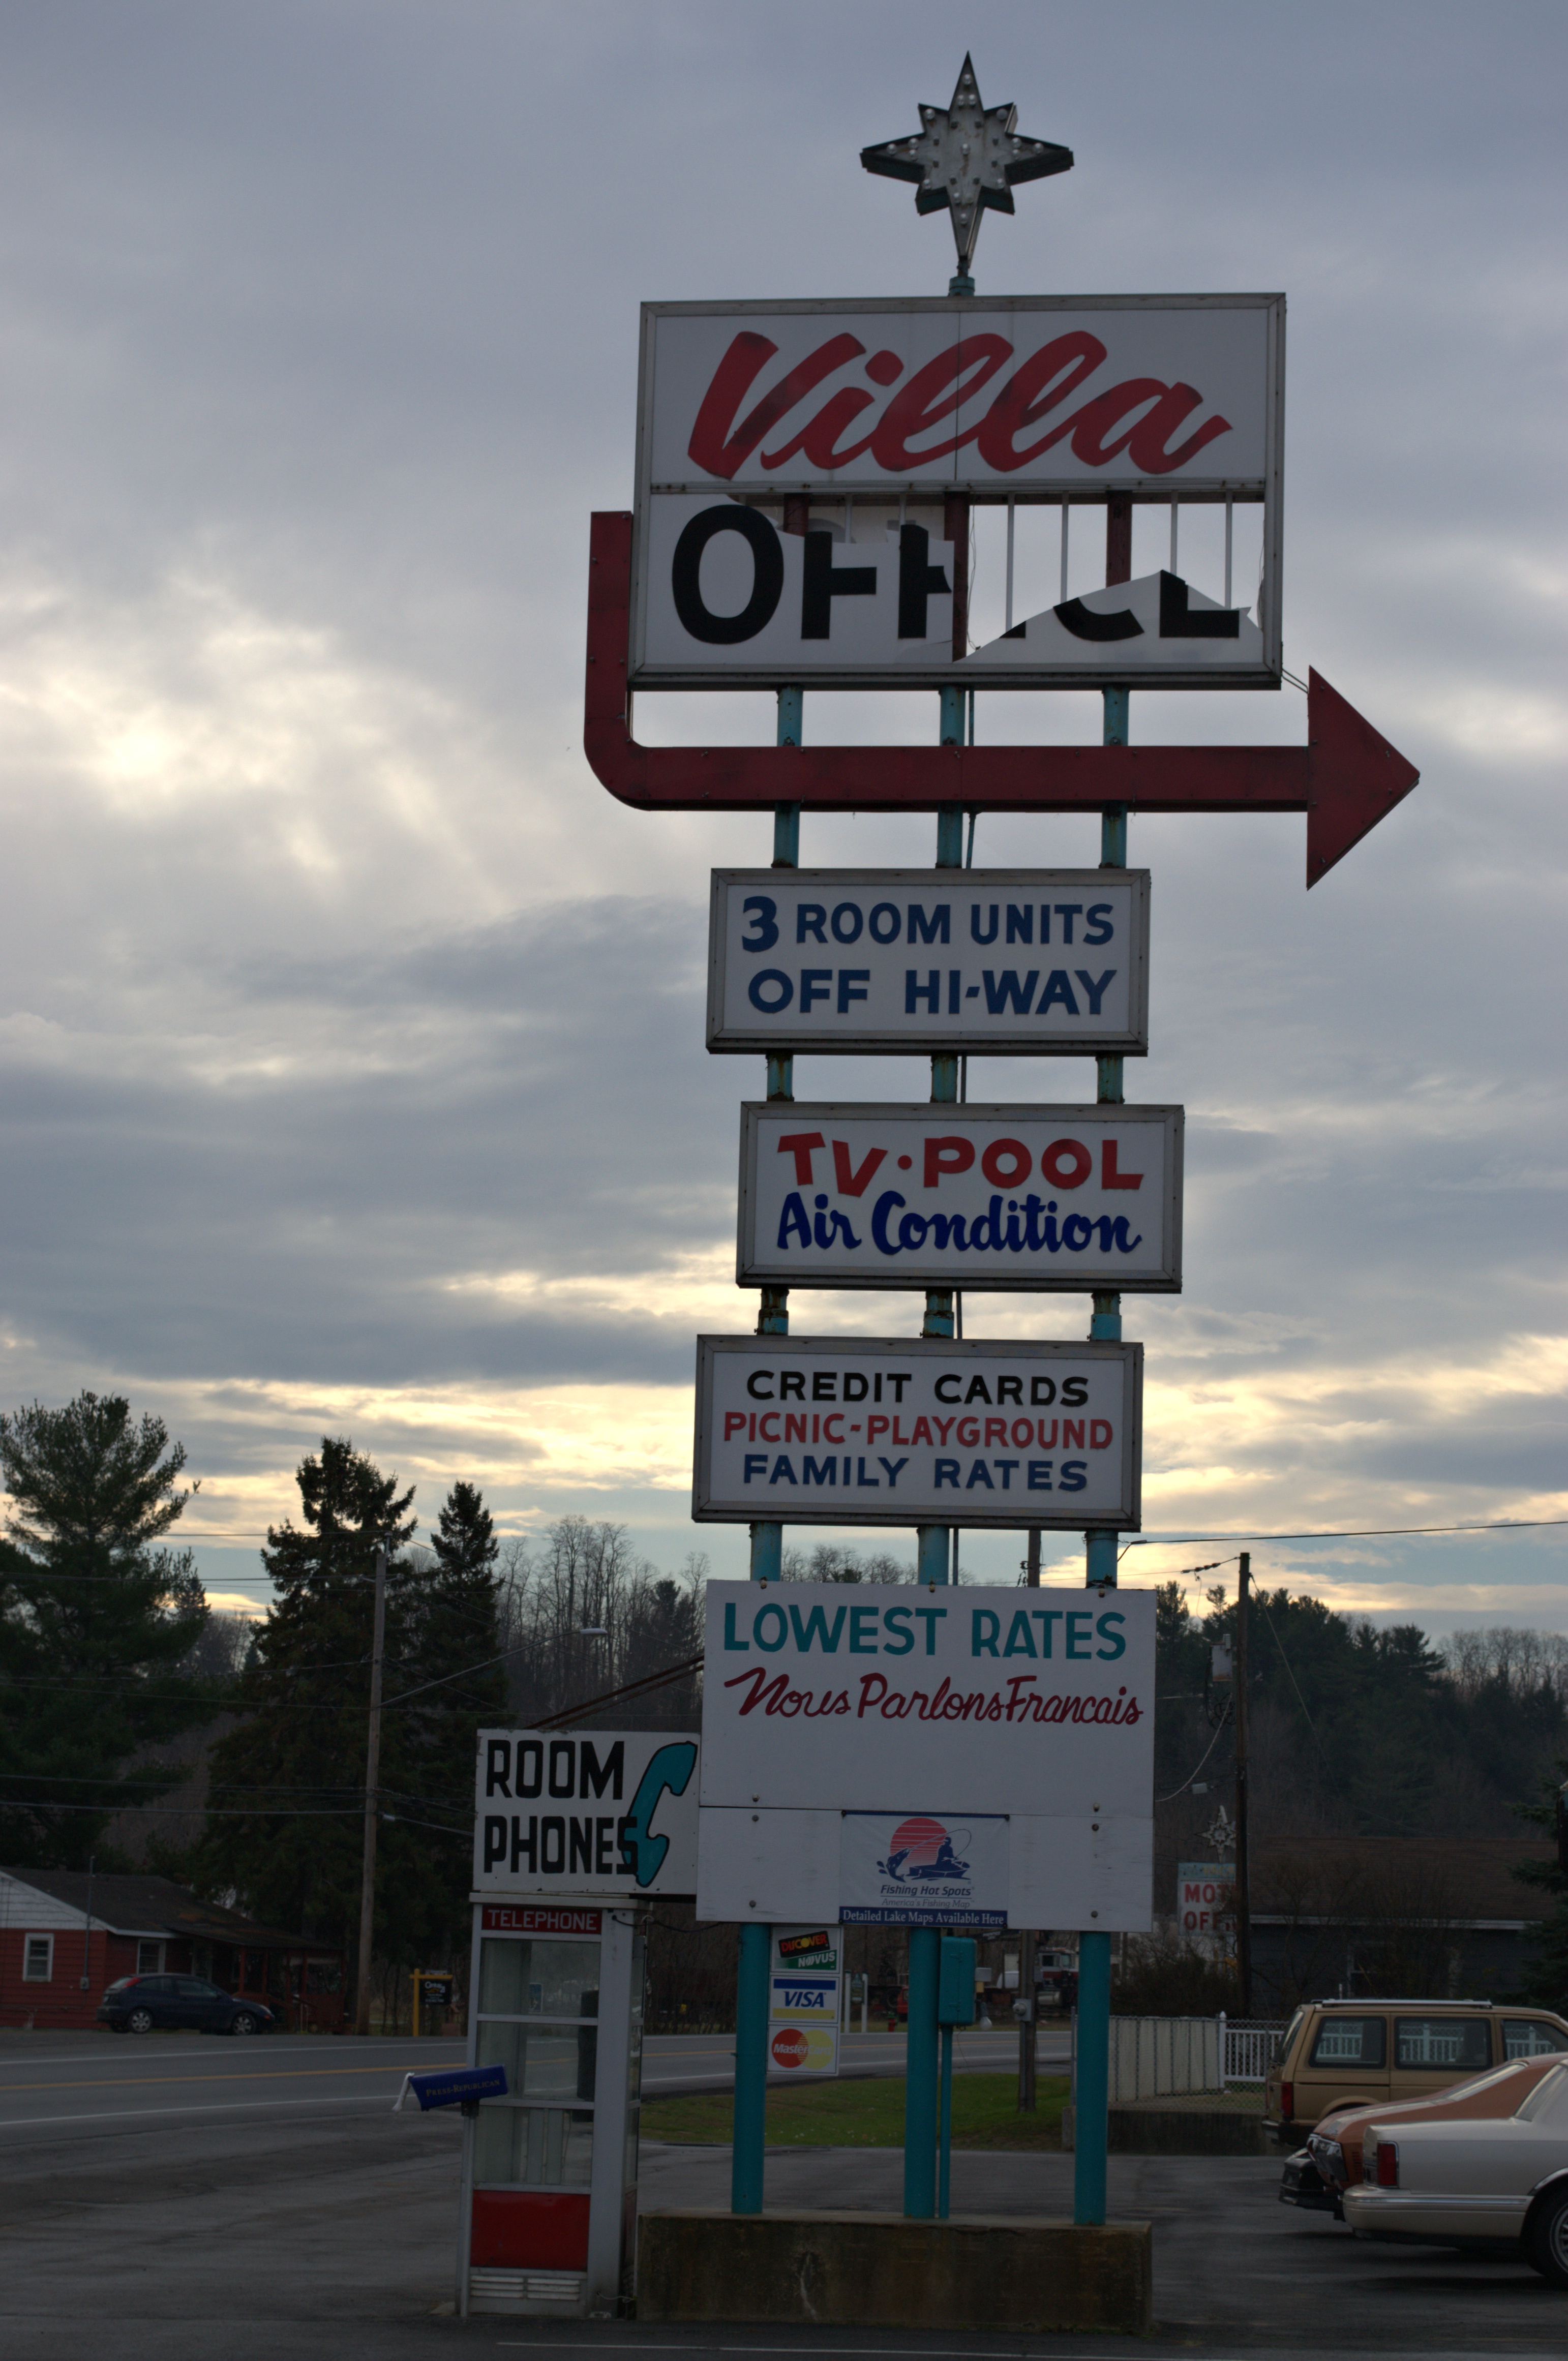 While taking pictures of this sign, the owner of the motel happened to be walking by, giving us a strange look. To relieve some of the tension, we told her we liked her sign, and asked how old it was. She scratched her head in thought, and said it's been here since the mid 50s. 